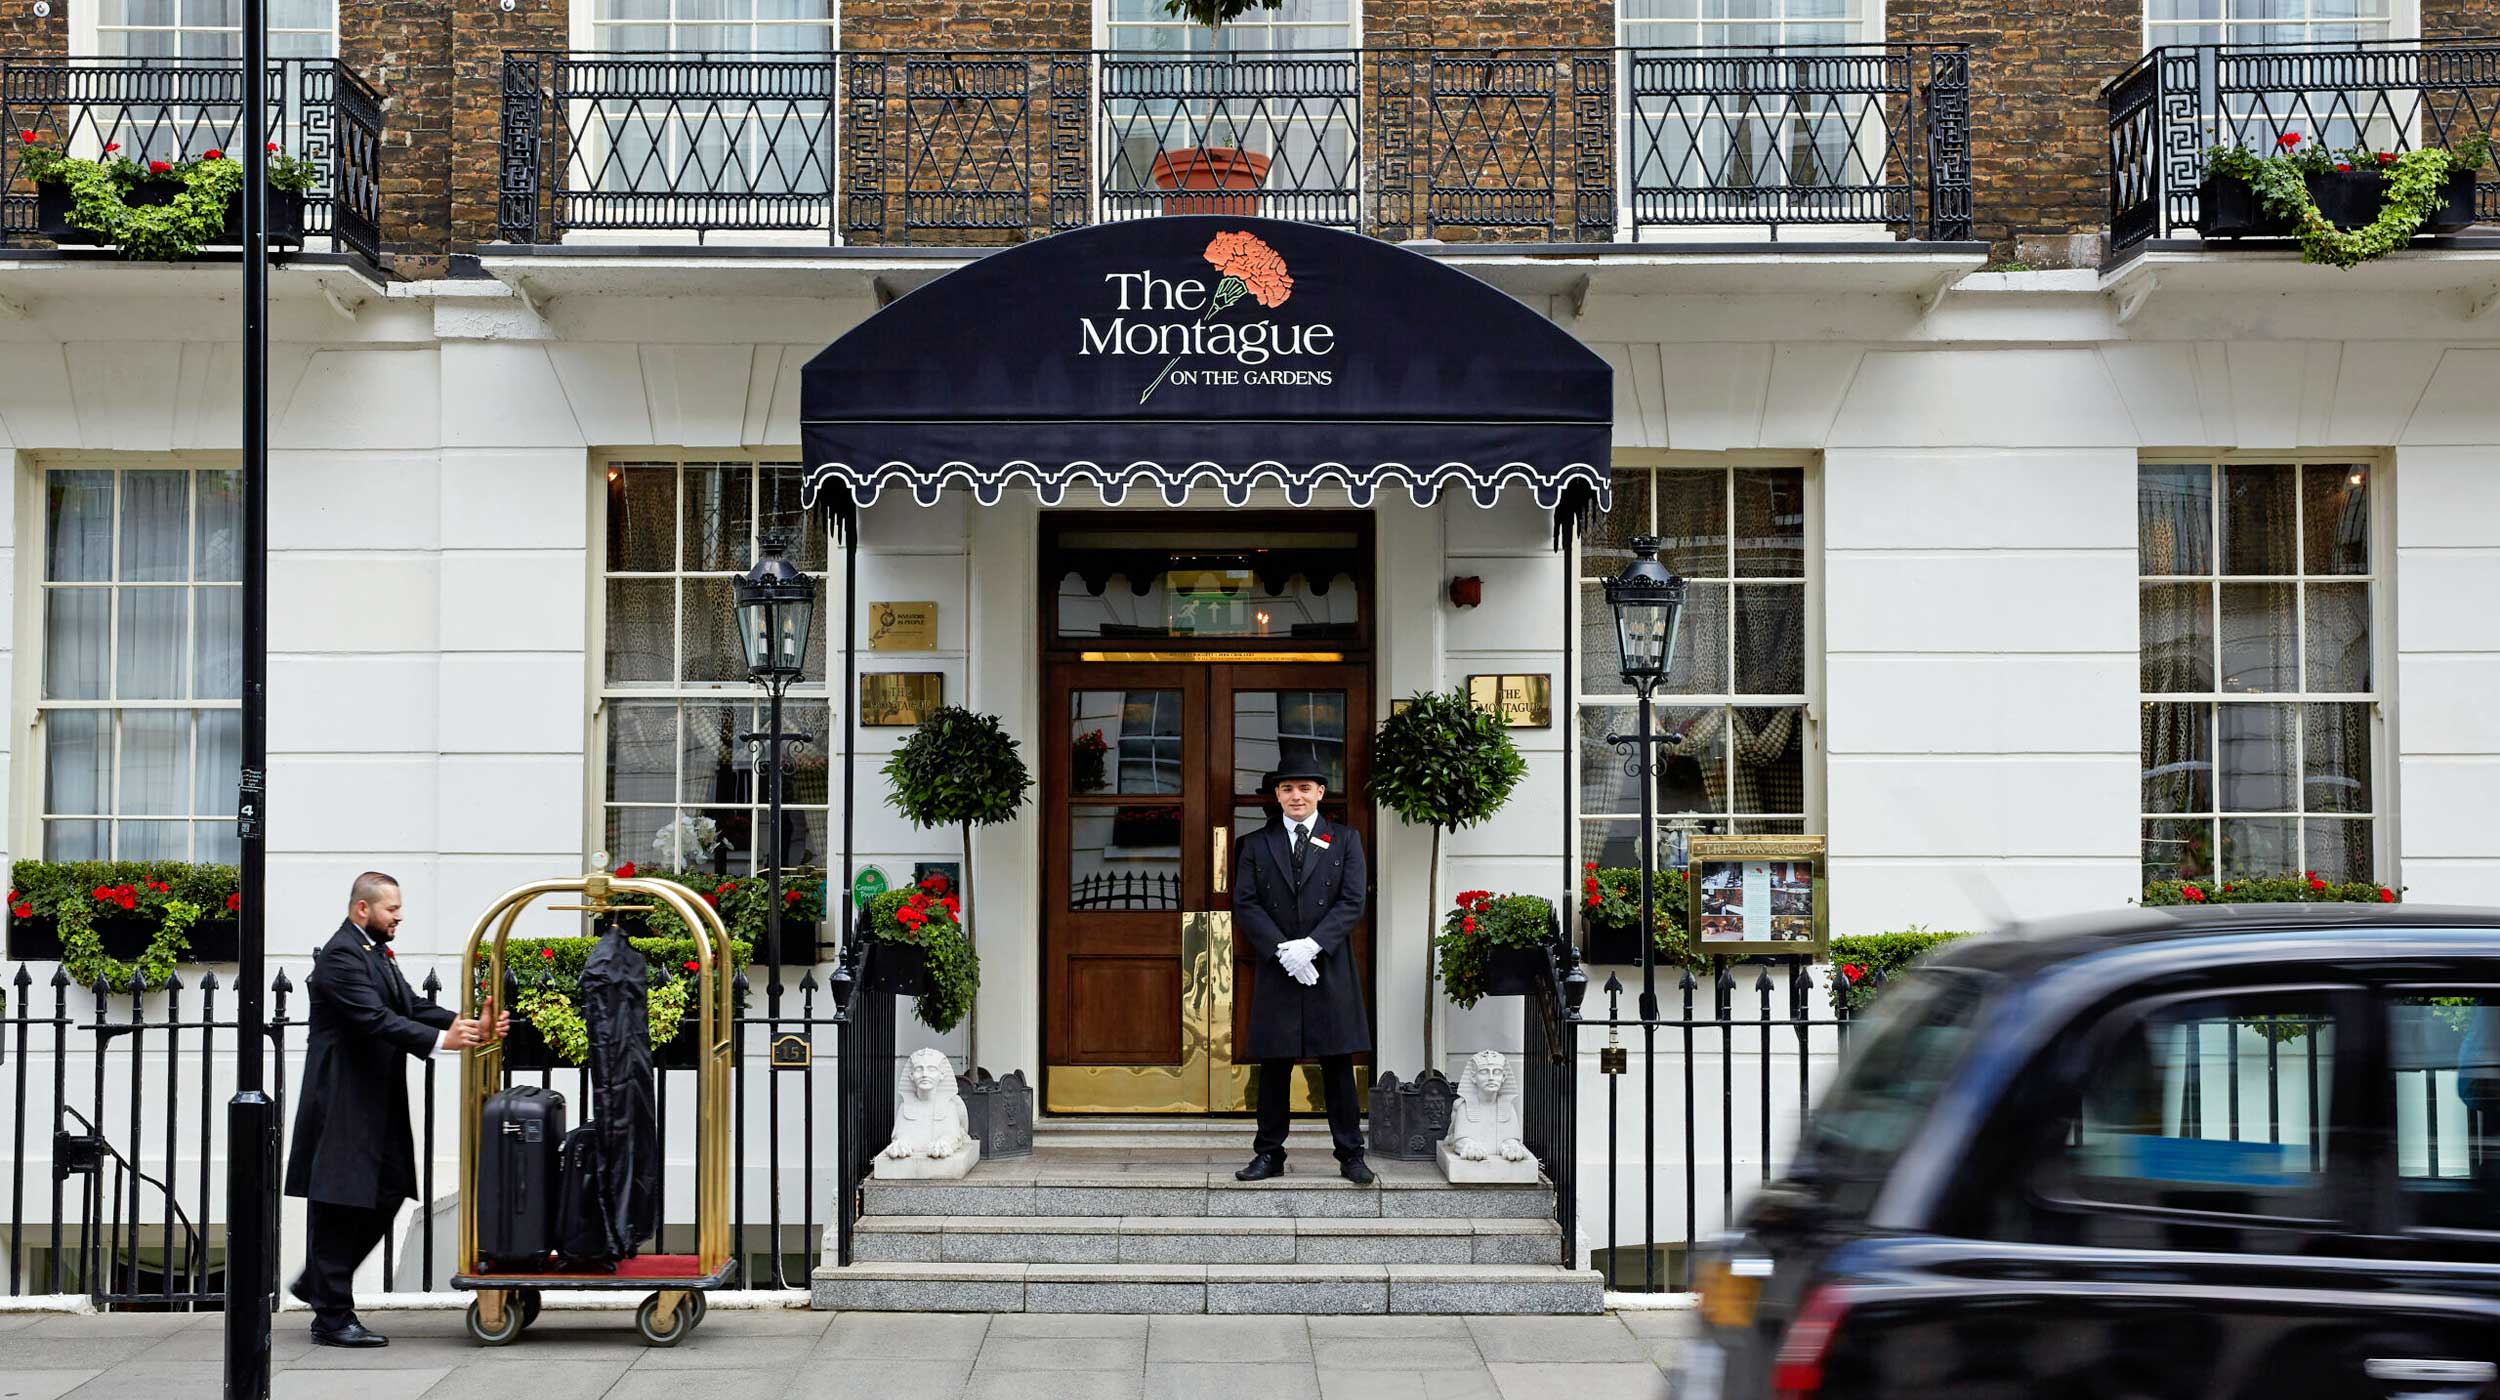 The Montague on the Gardens, London, England